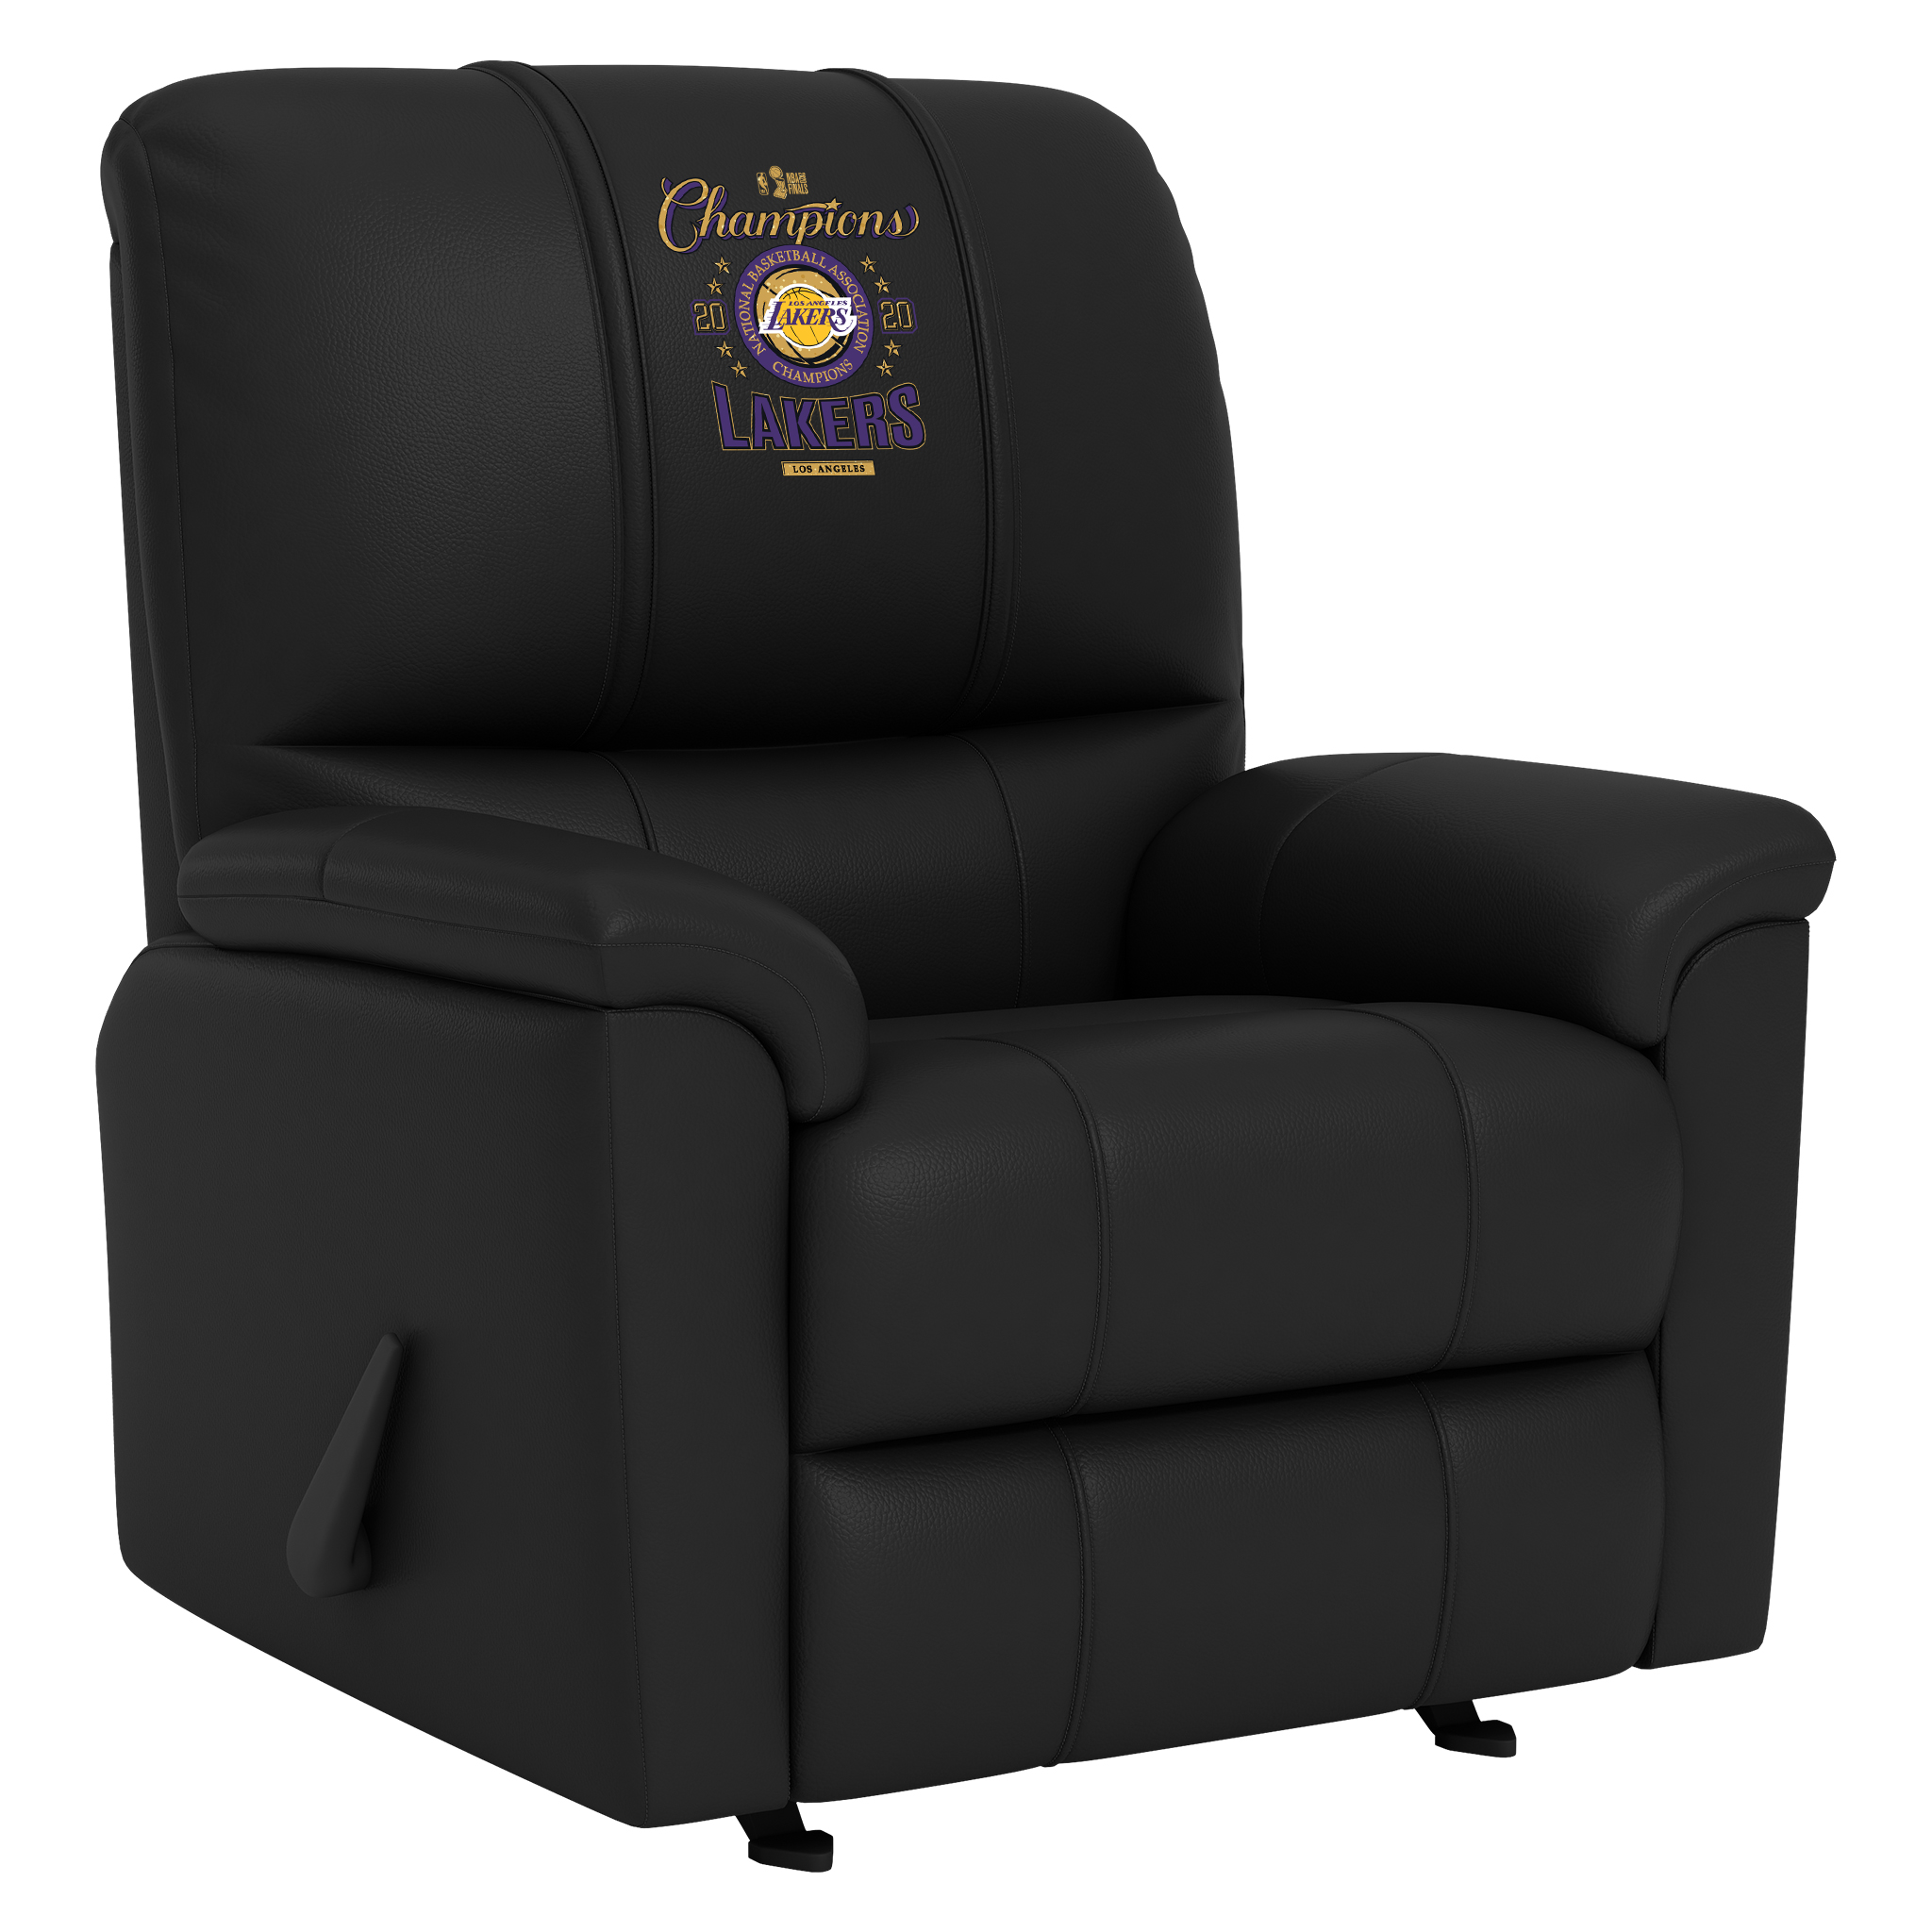 Golden State Warriors Silver Club Chair with Golden State Warriors Champions Logo